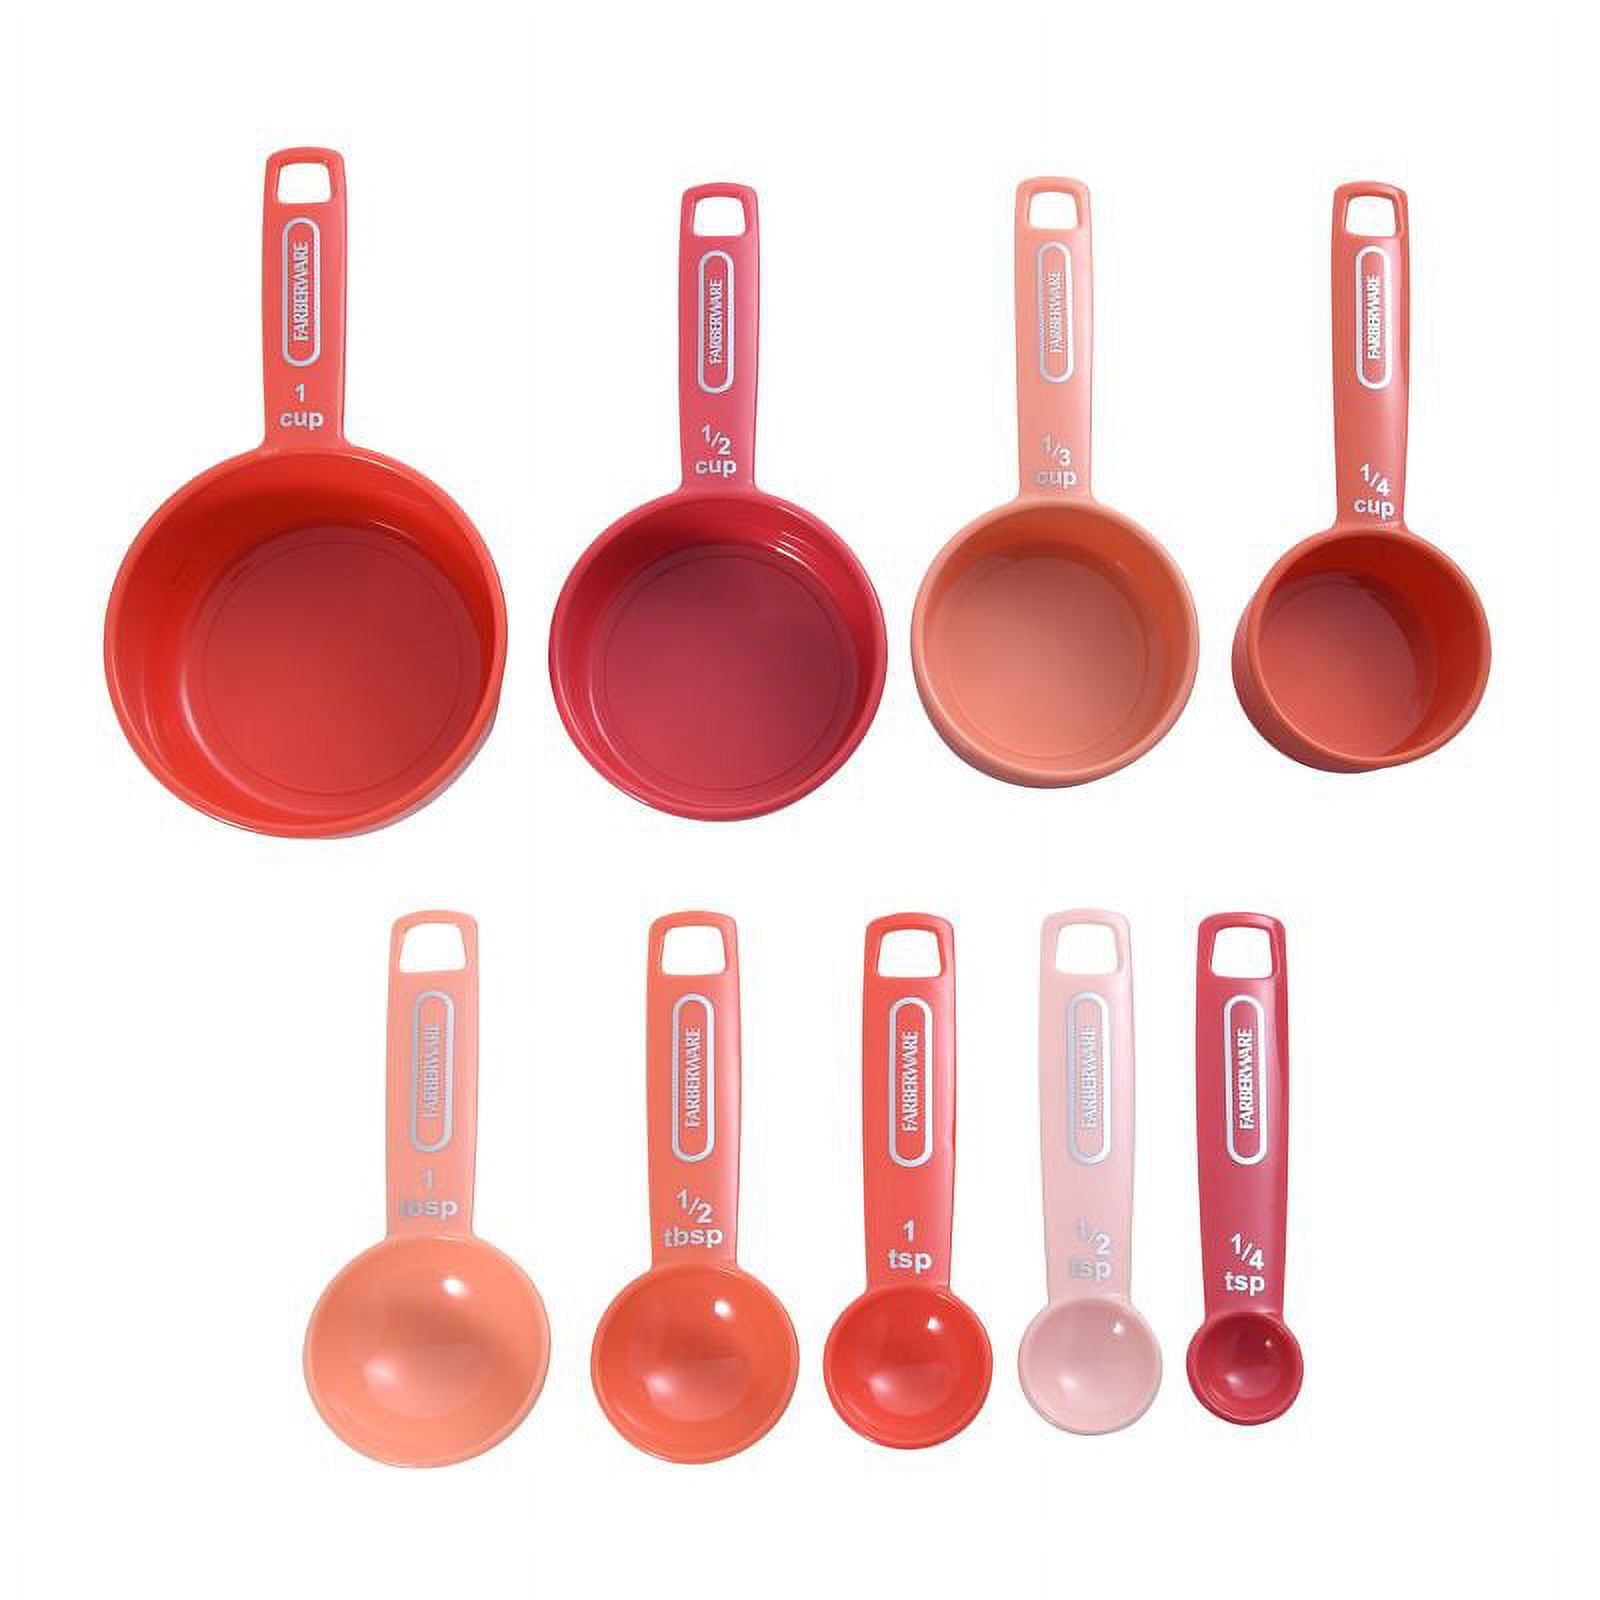 Farberware Measuring Cups And Spoons Set, 9 Piece : Target